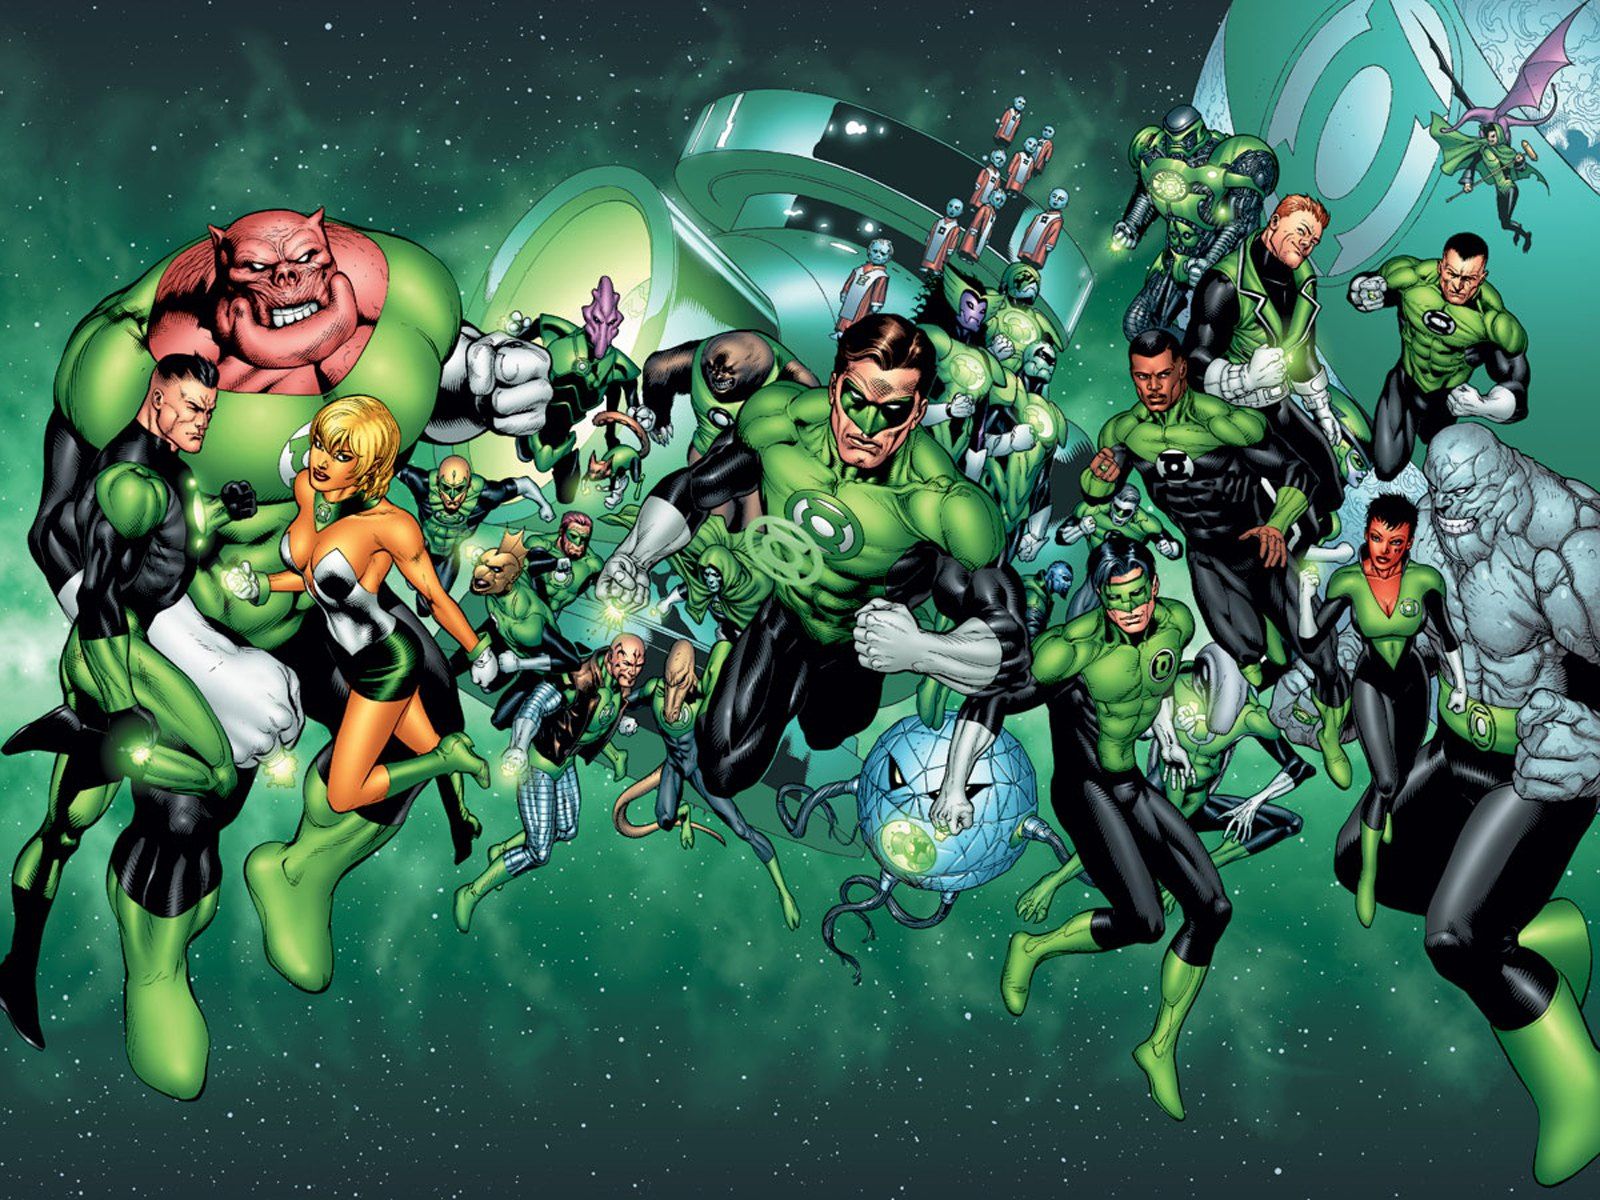 Grant Morrison will relaunch DC's Green Lantern this fall with a